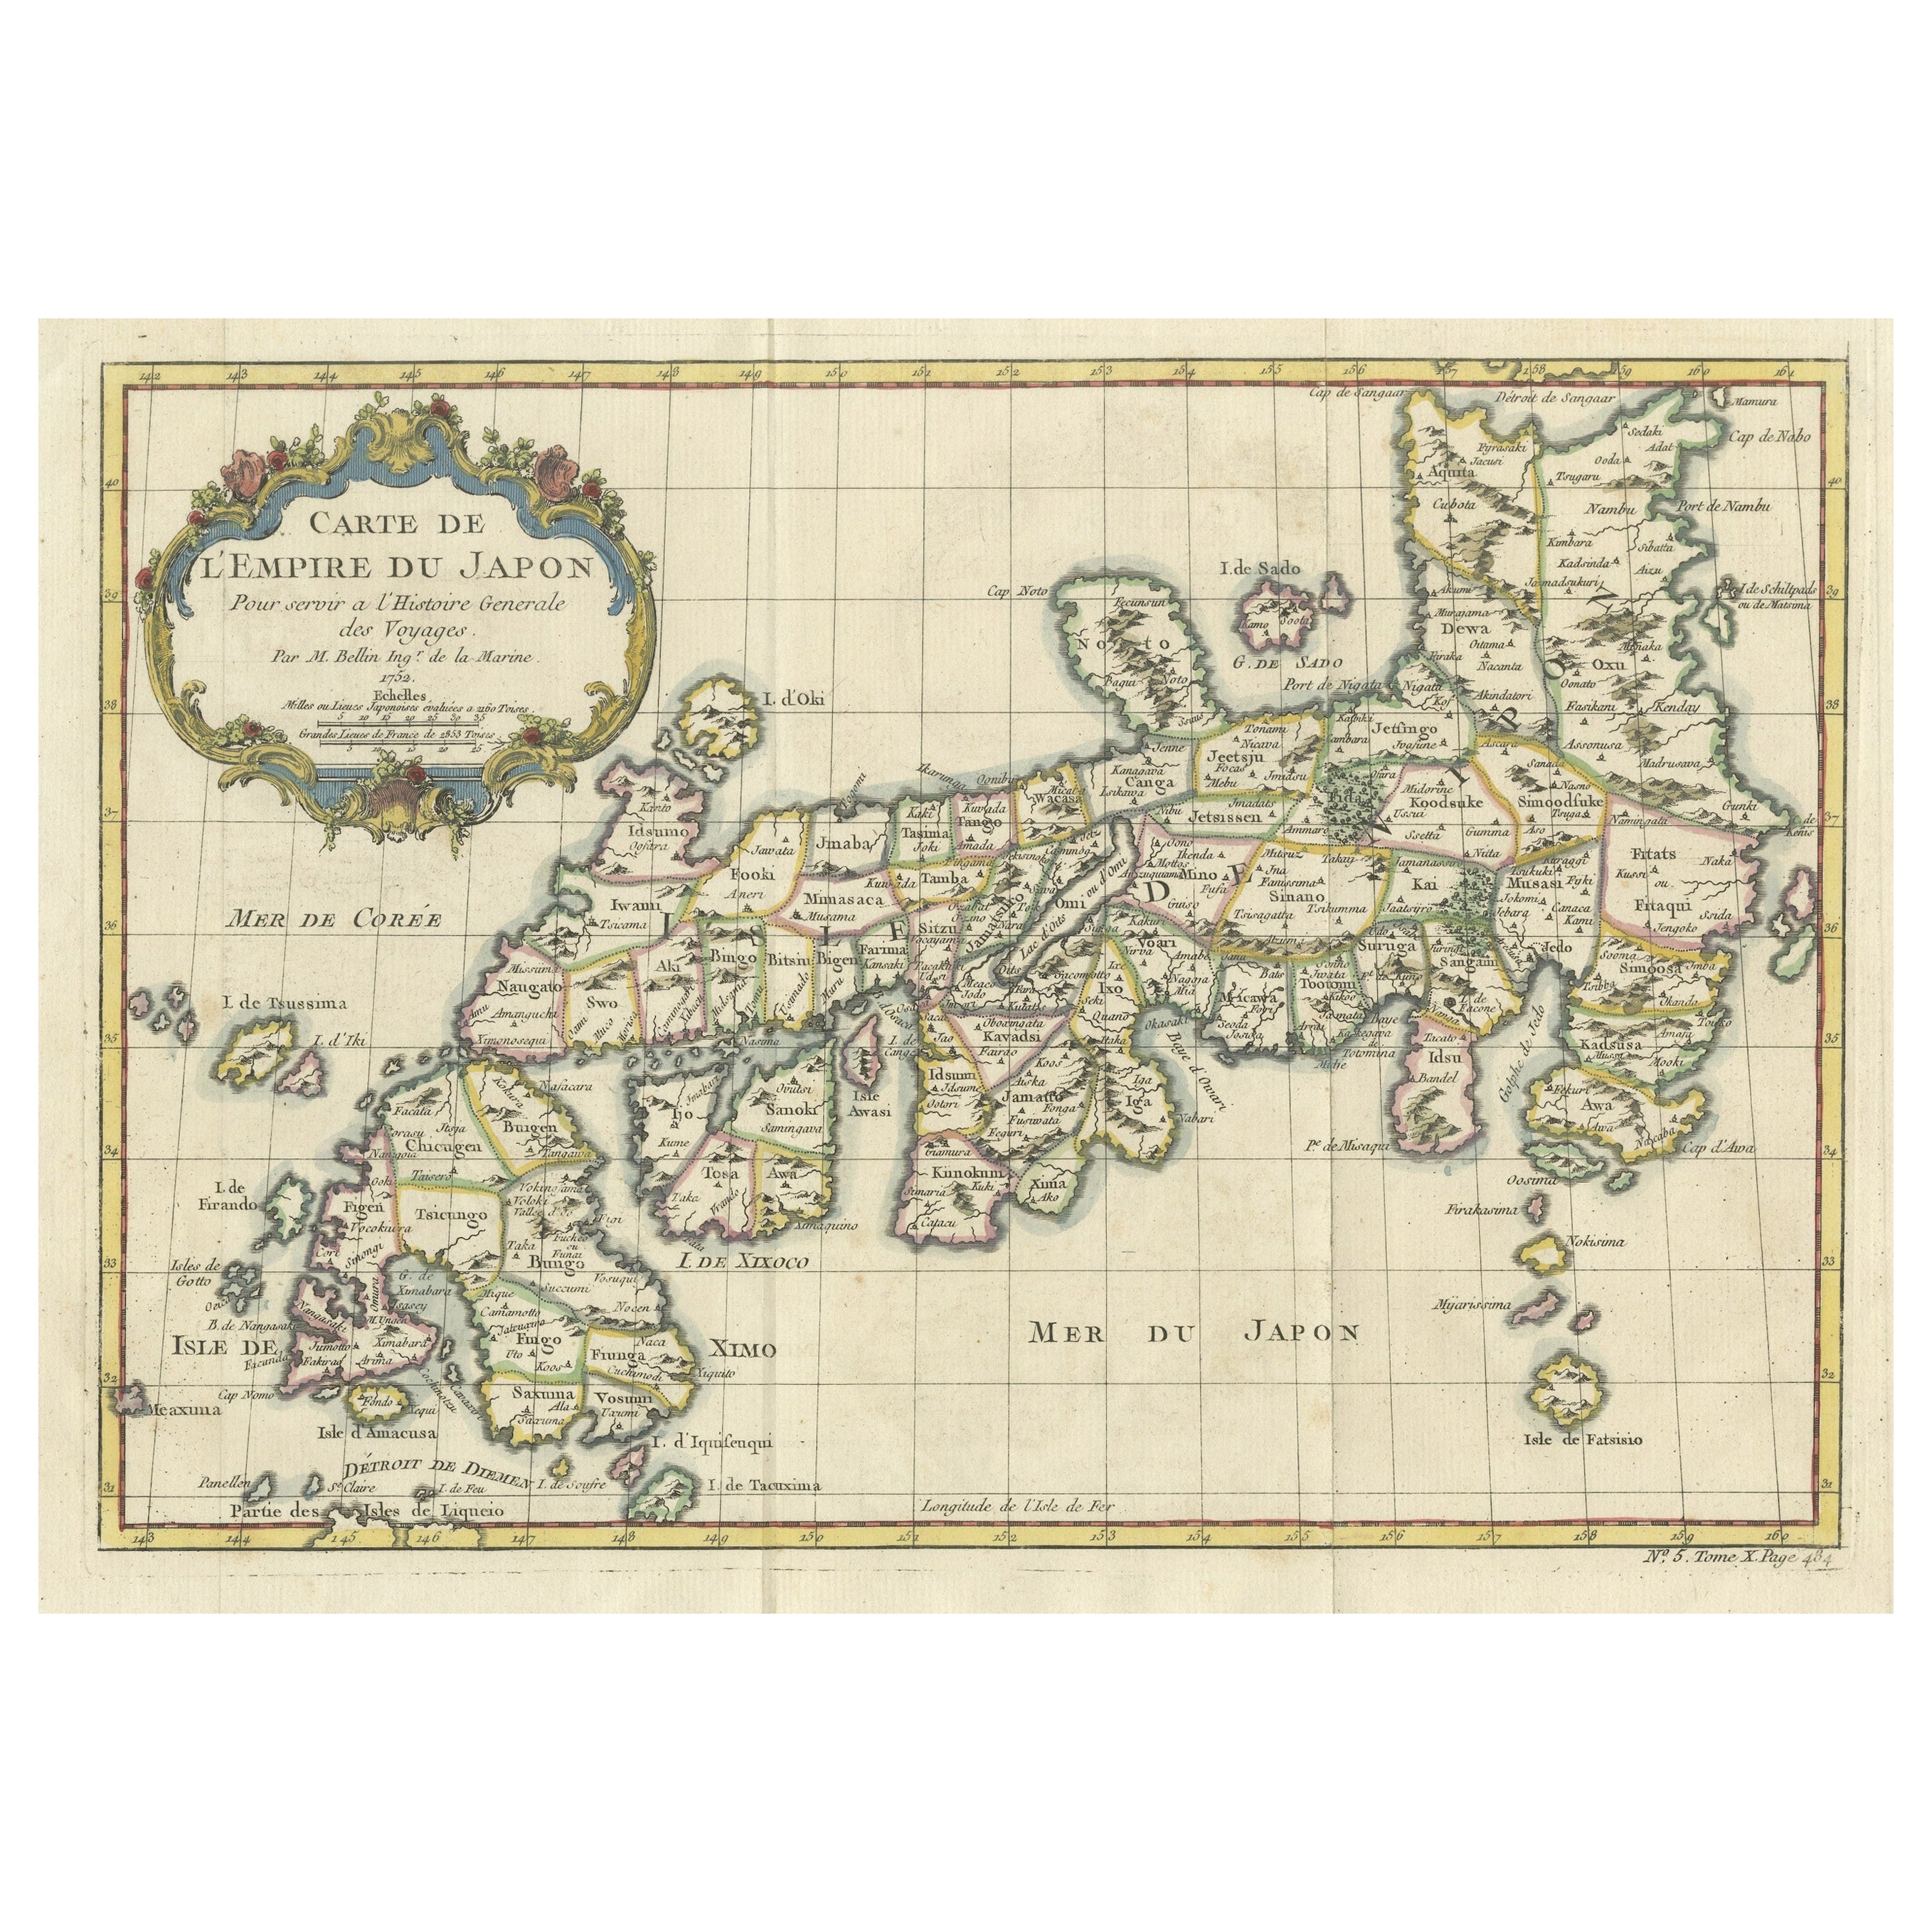 Attractive Hand-Tinted Antique Map of Japan, Published in 1752